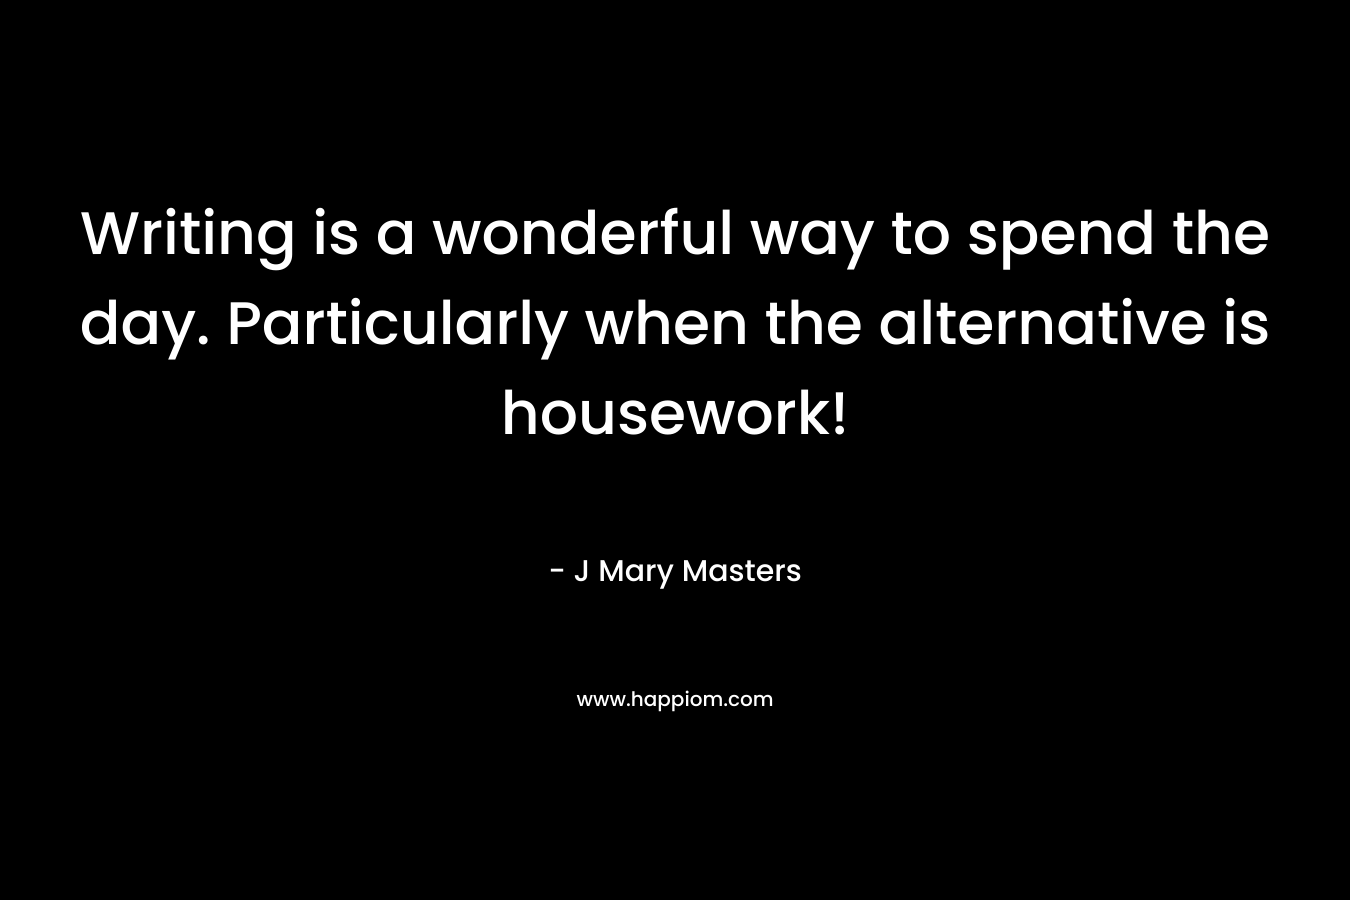 Writing is a wonderful way to spend the day. Particularly when the alternative is housework! – J Mary Masters